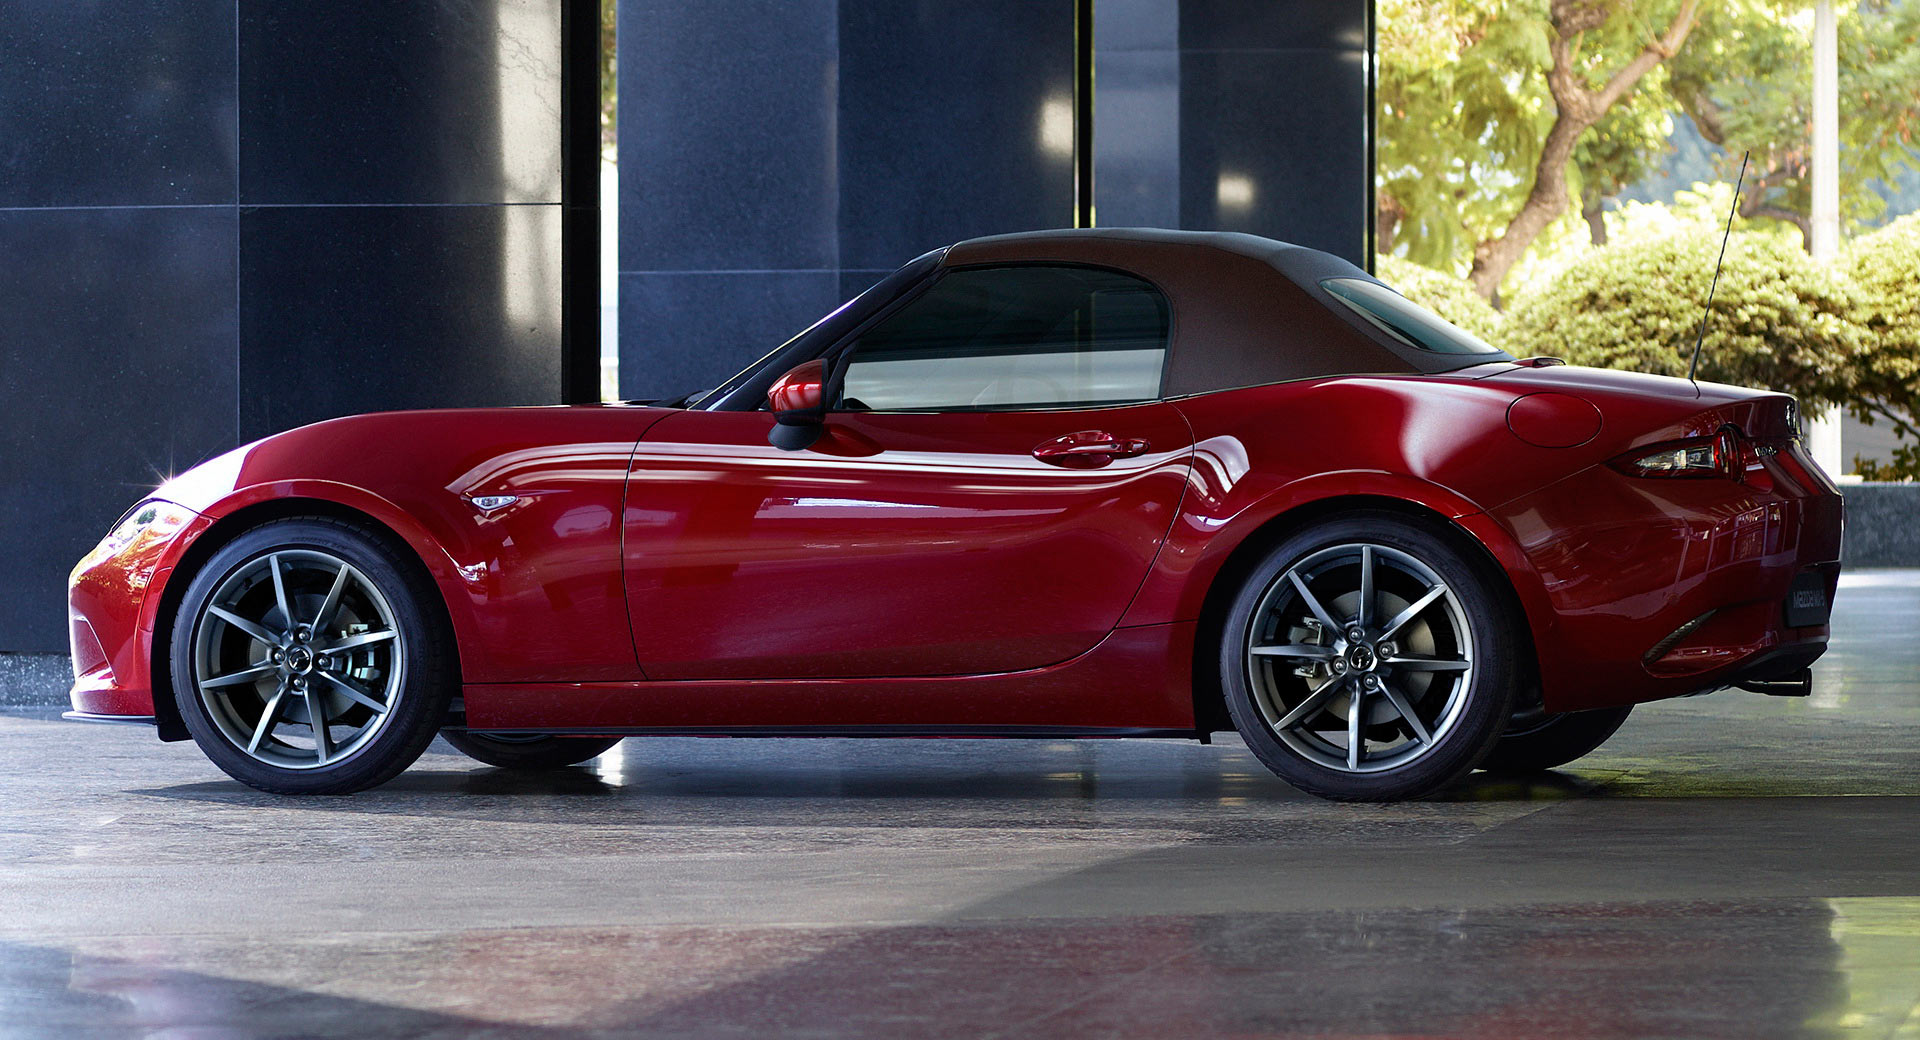 Updated 2019 Mazda MX5 Priced From £18,995 In The UK